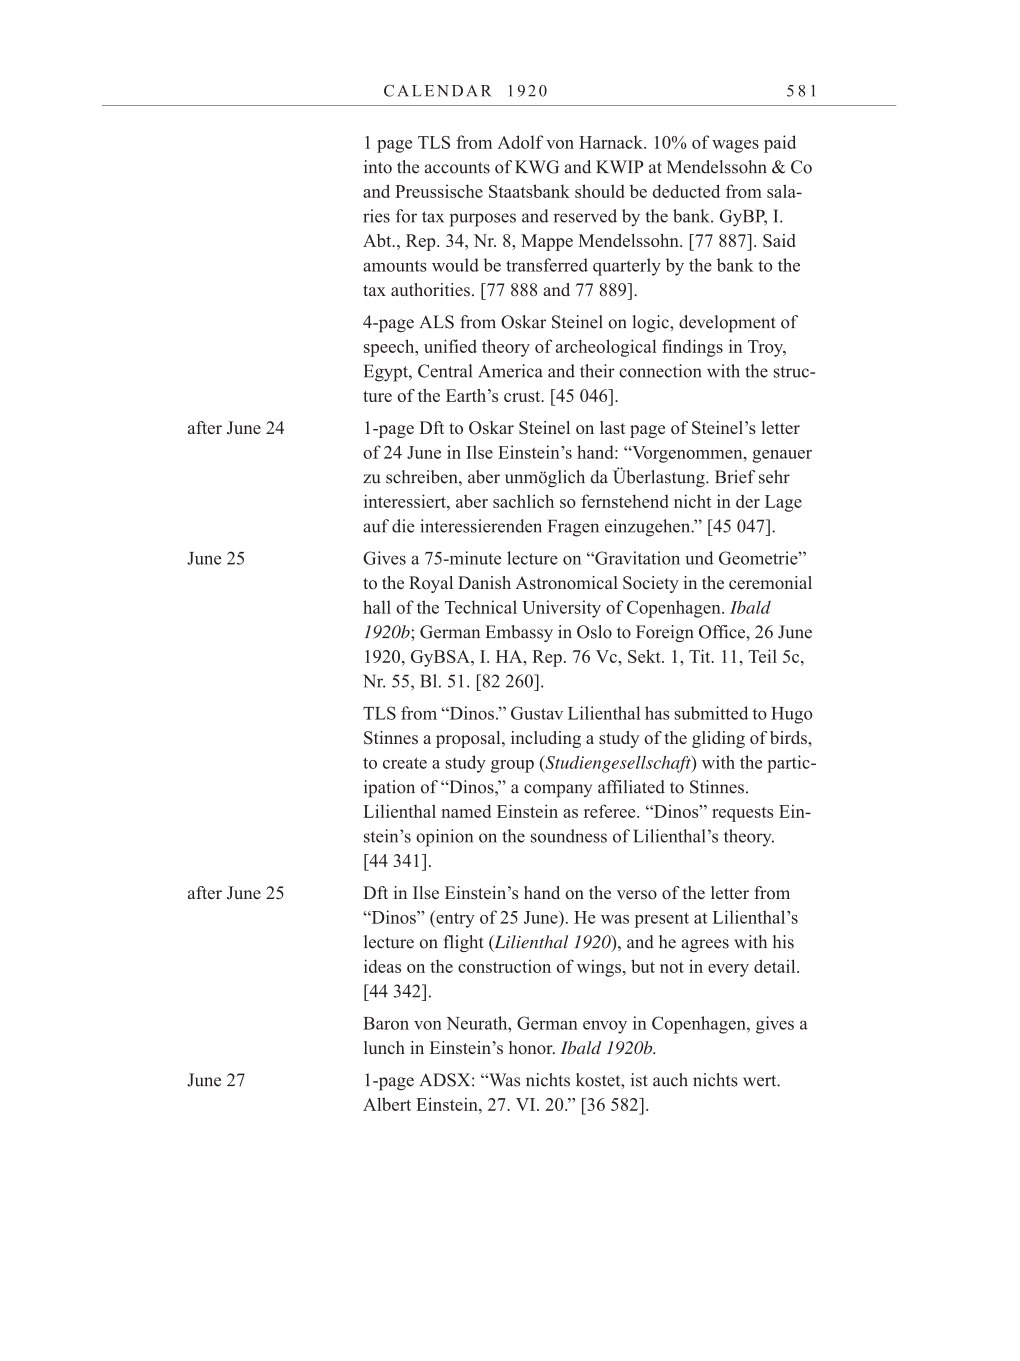 Volume 10: The Berlin Years: Correspondence May-December 1920 / Supplementary Correspondence 1909-1920 page 581